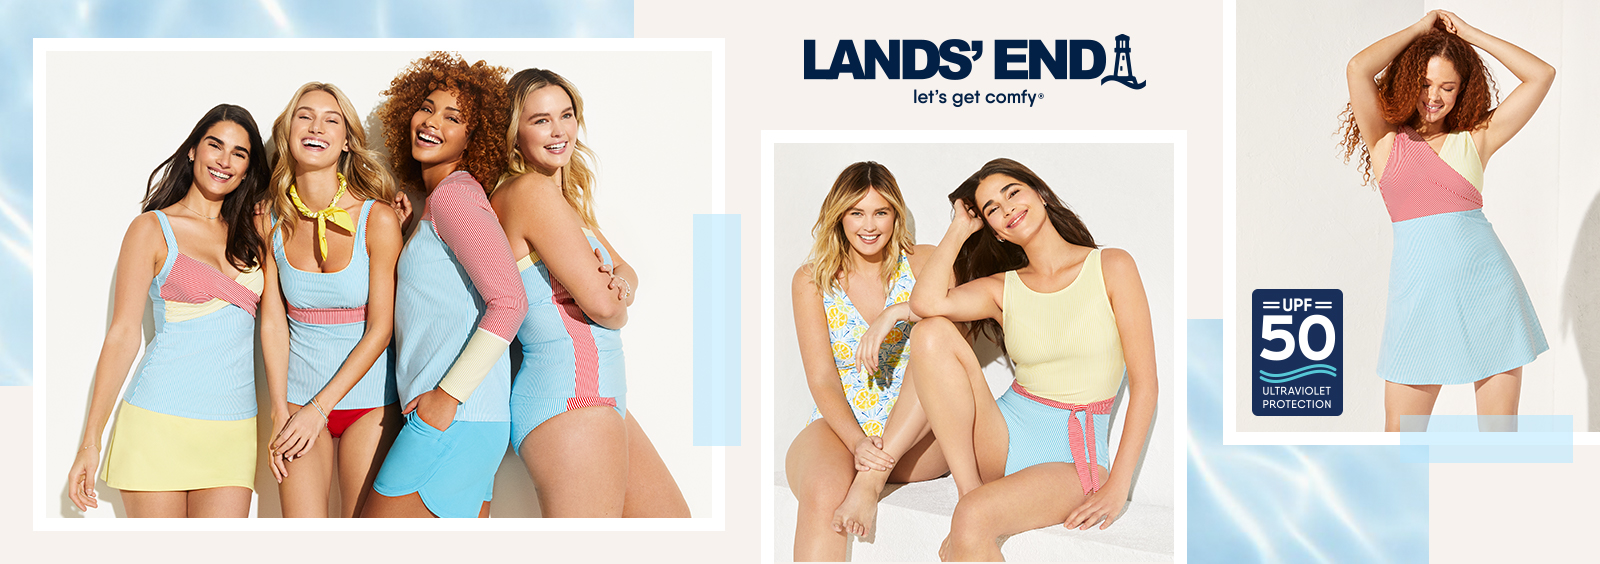 Lands’ End and The Skin Cancer Foundation Partner to Keep You Safe All Summer Long